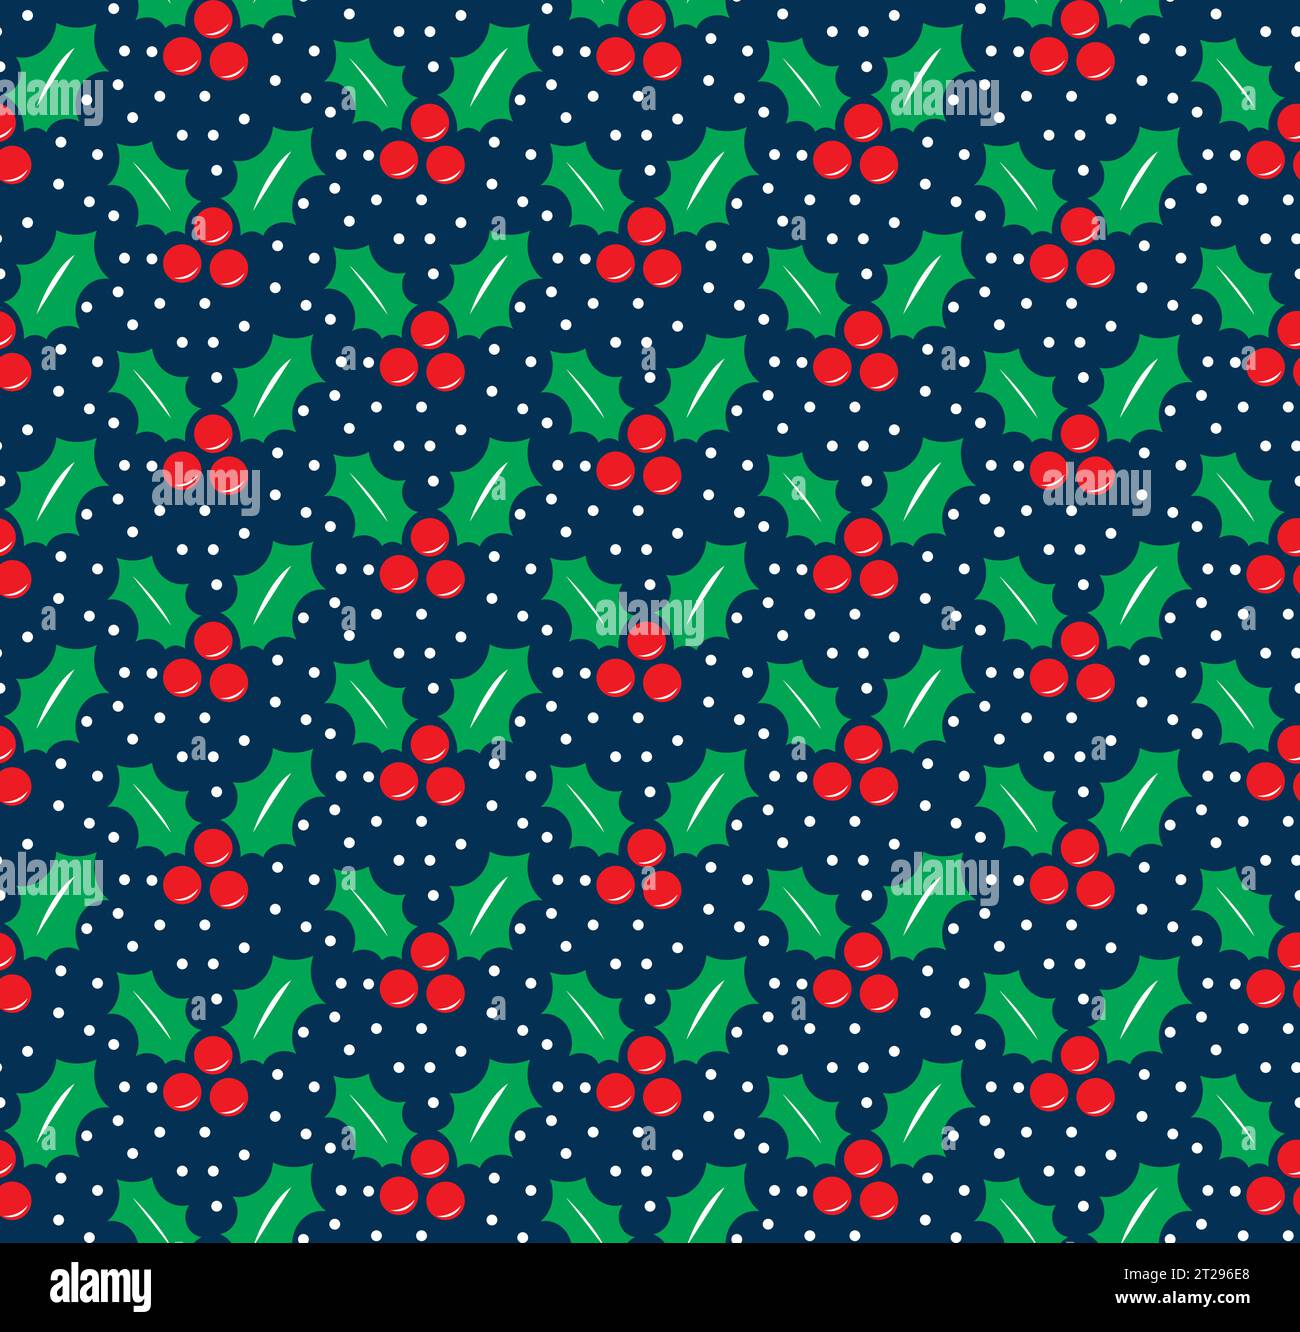 seamless pattern with holly berry Stock Vector